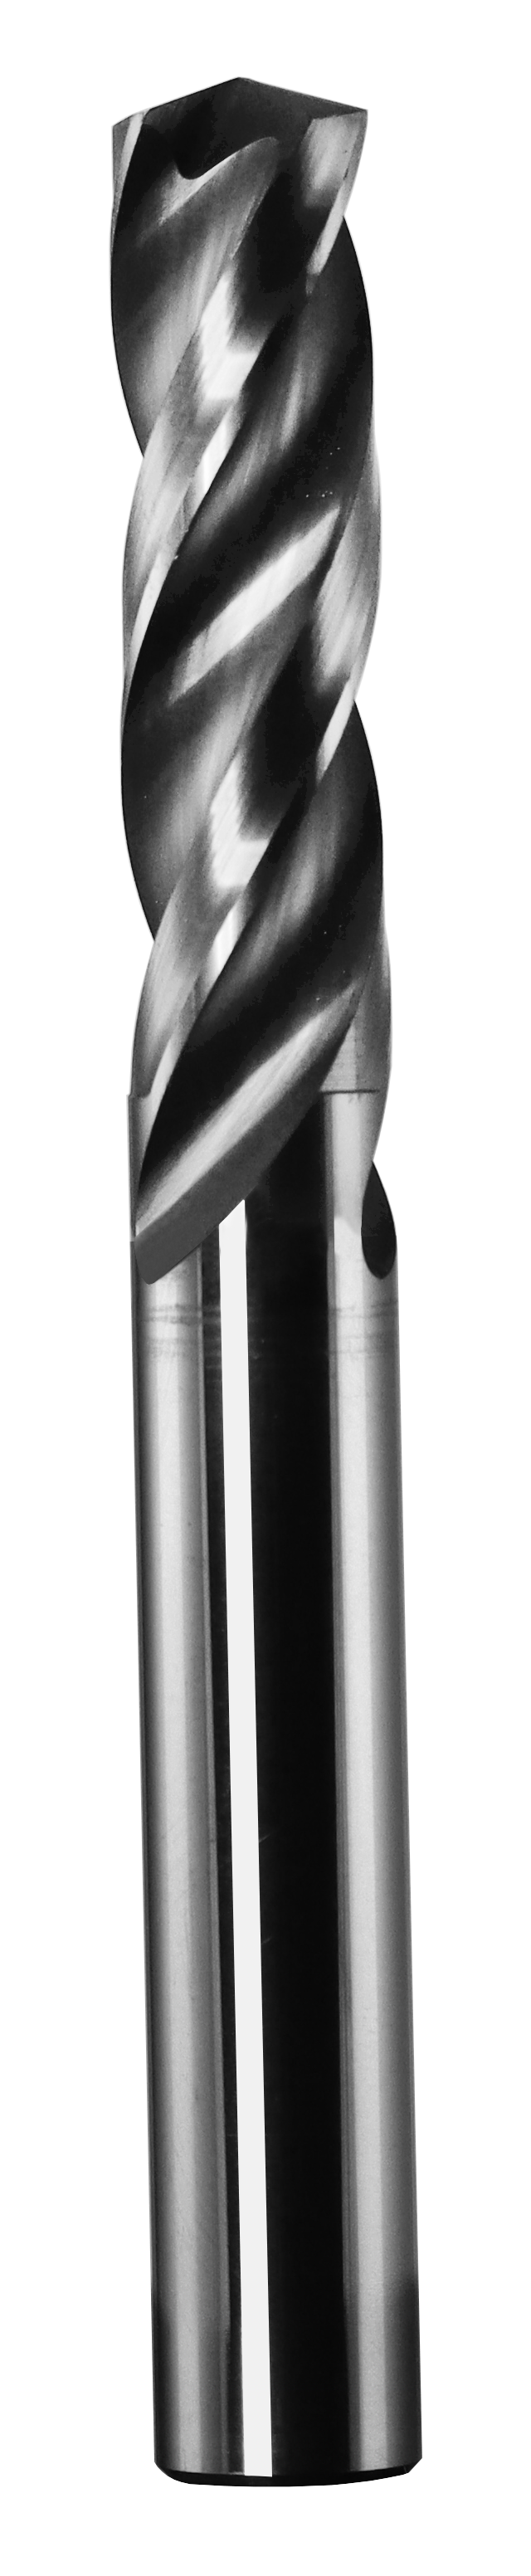 3.90mm Dia, 150 Degree Point, Solid Carbide Drill - 63049